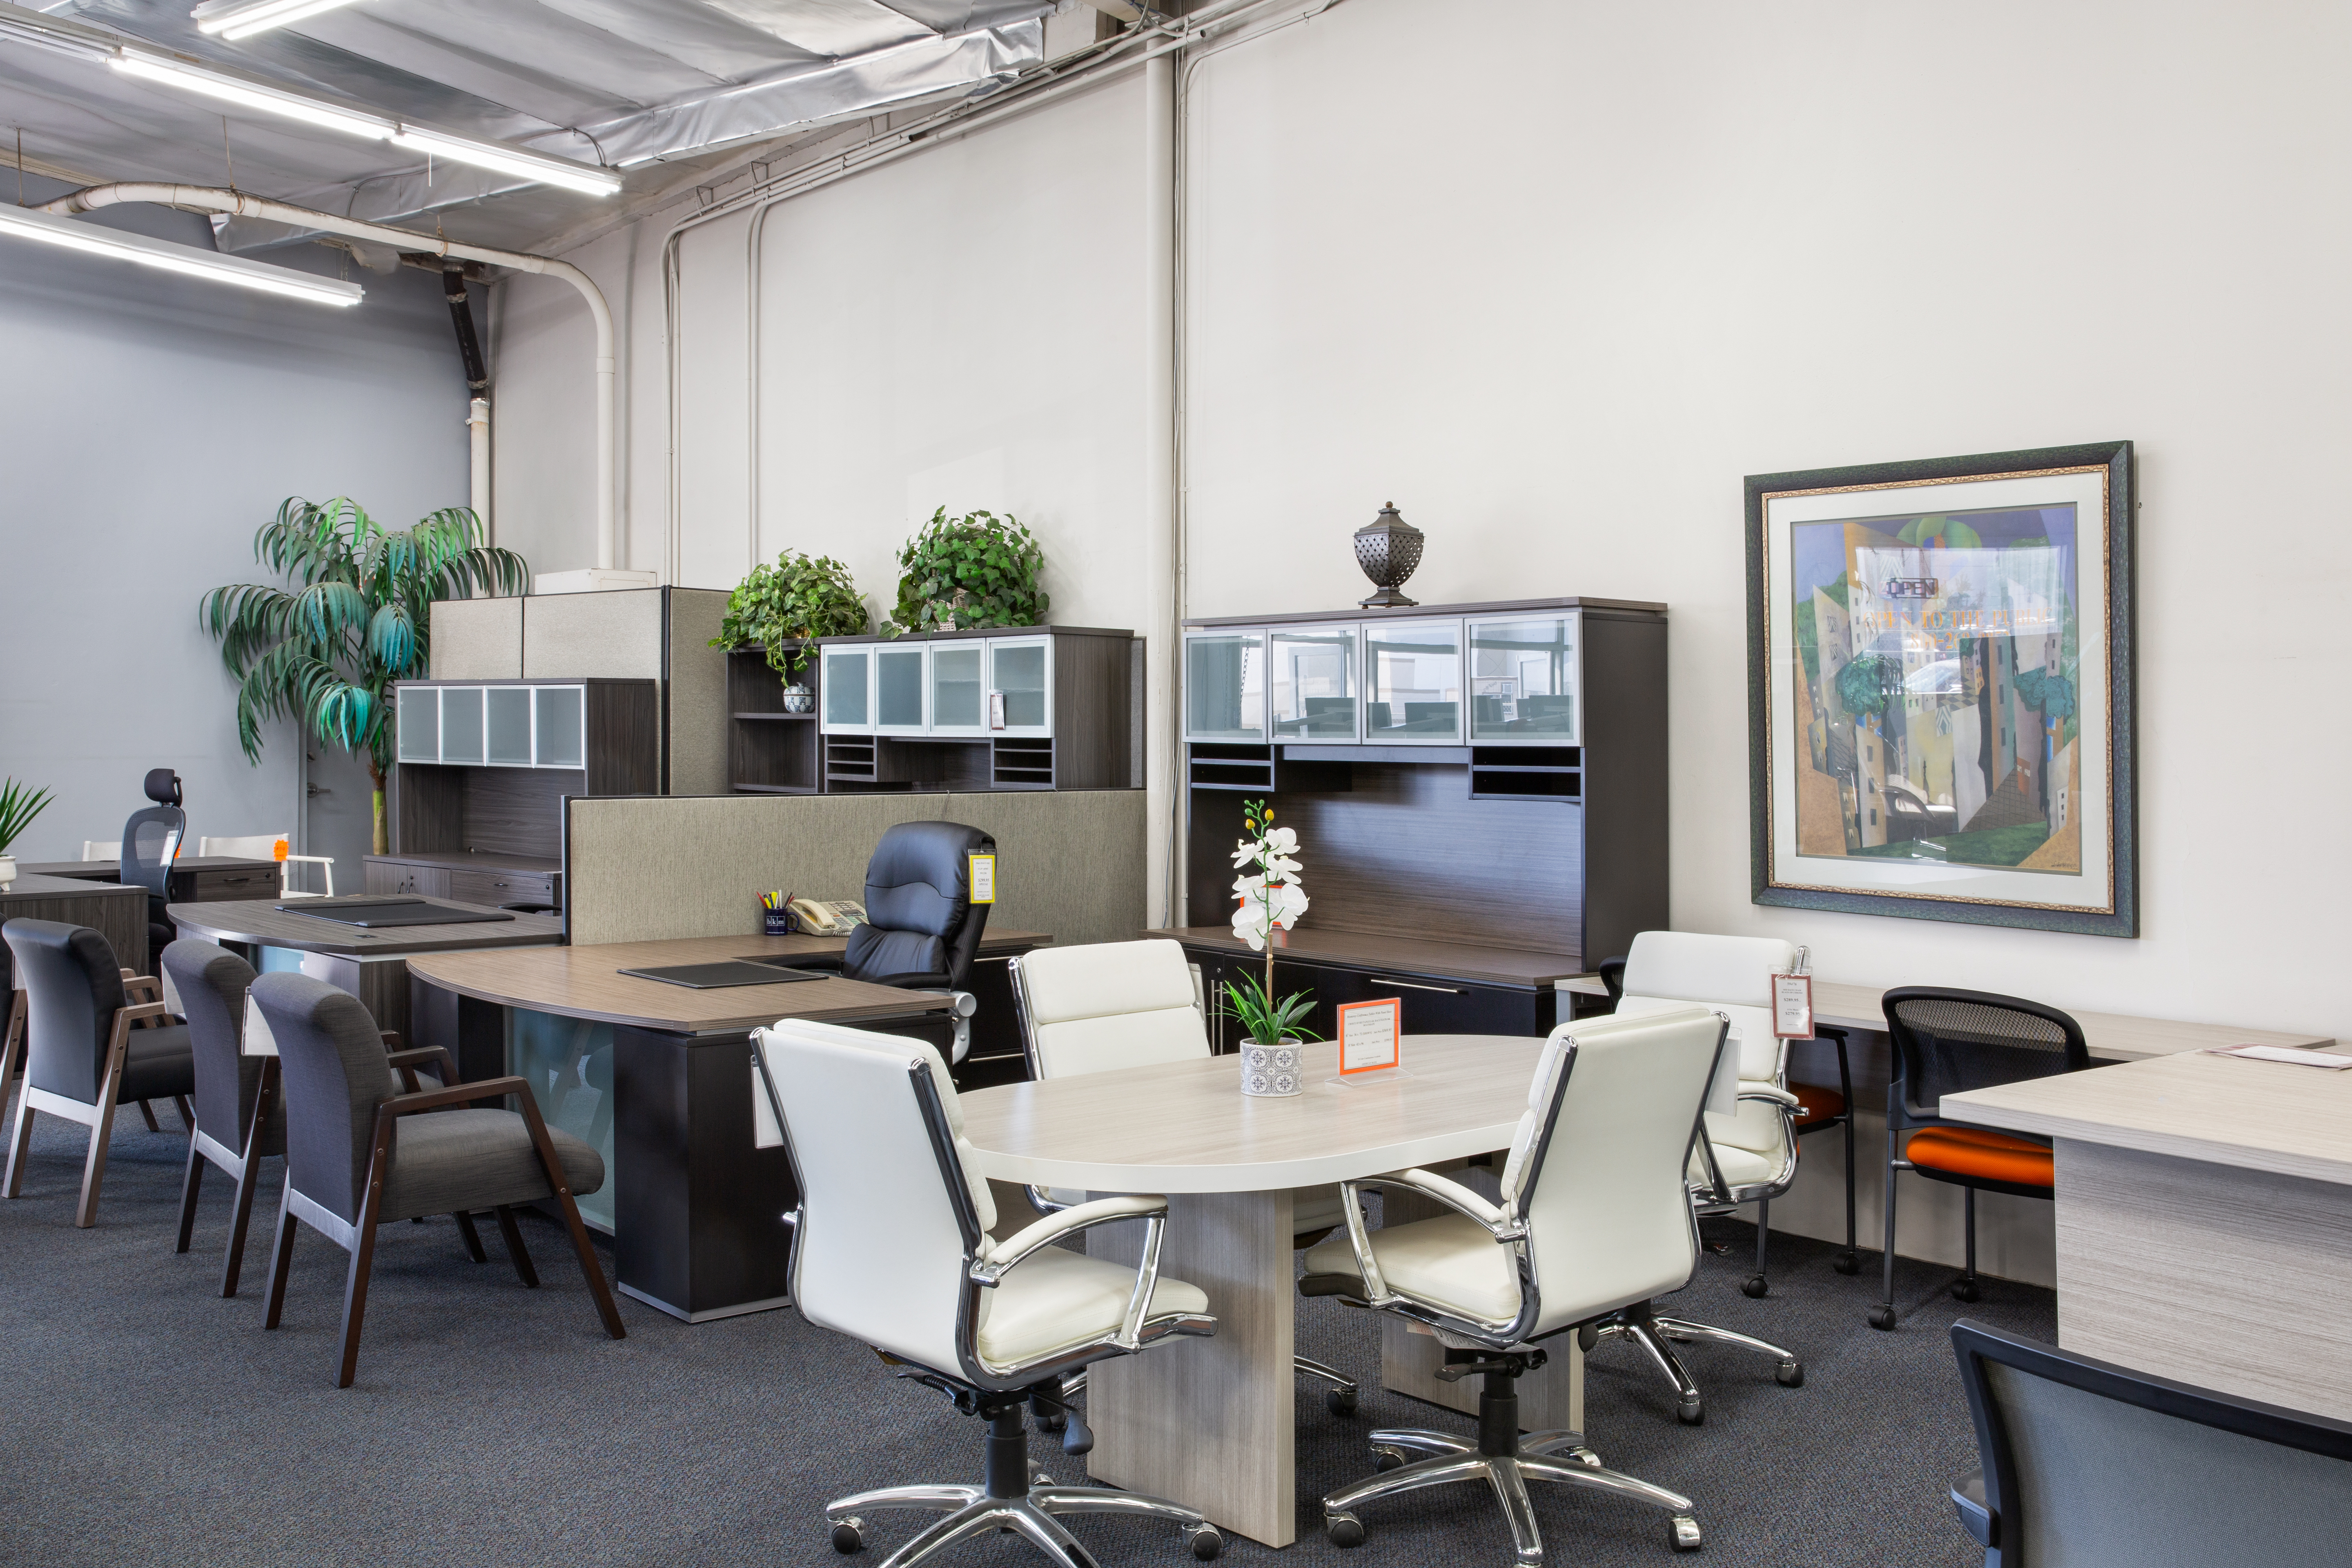 Quality office furniture solutions in Downey, CA